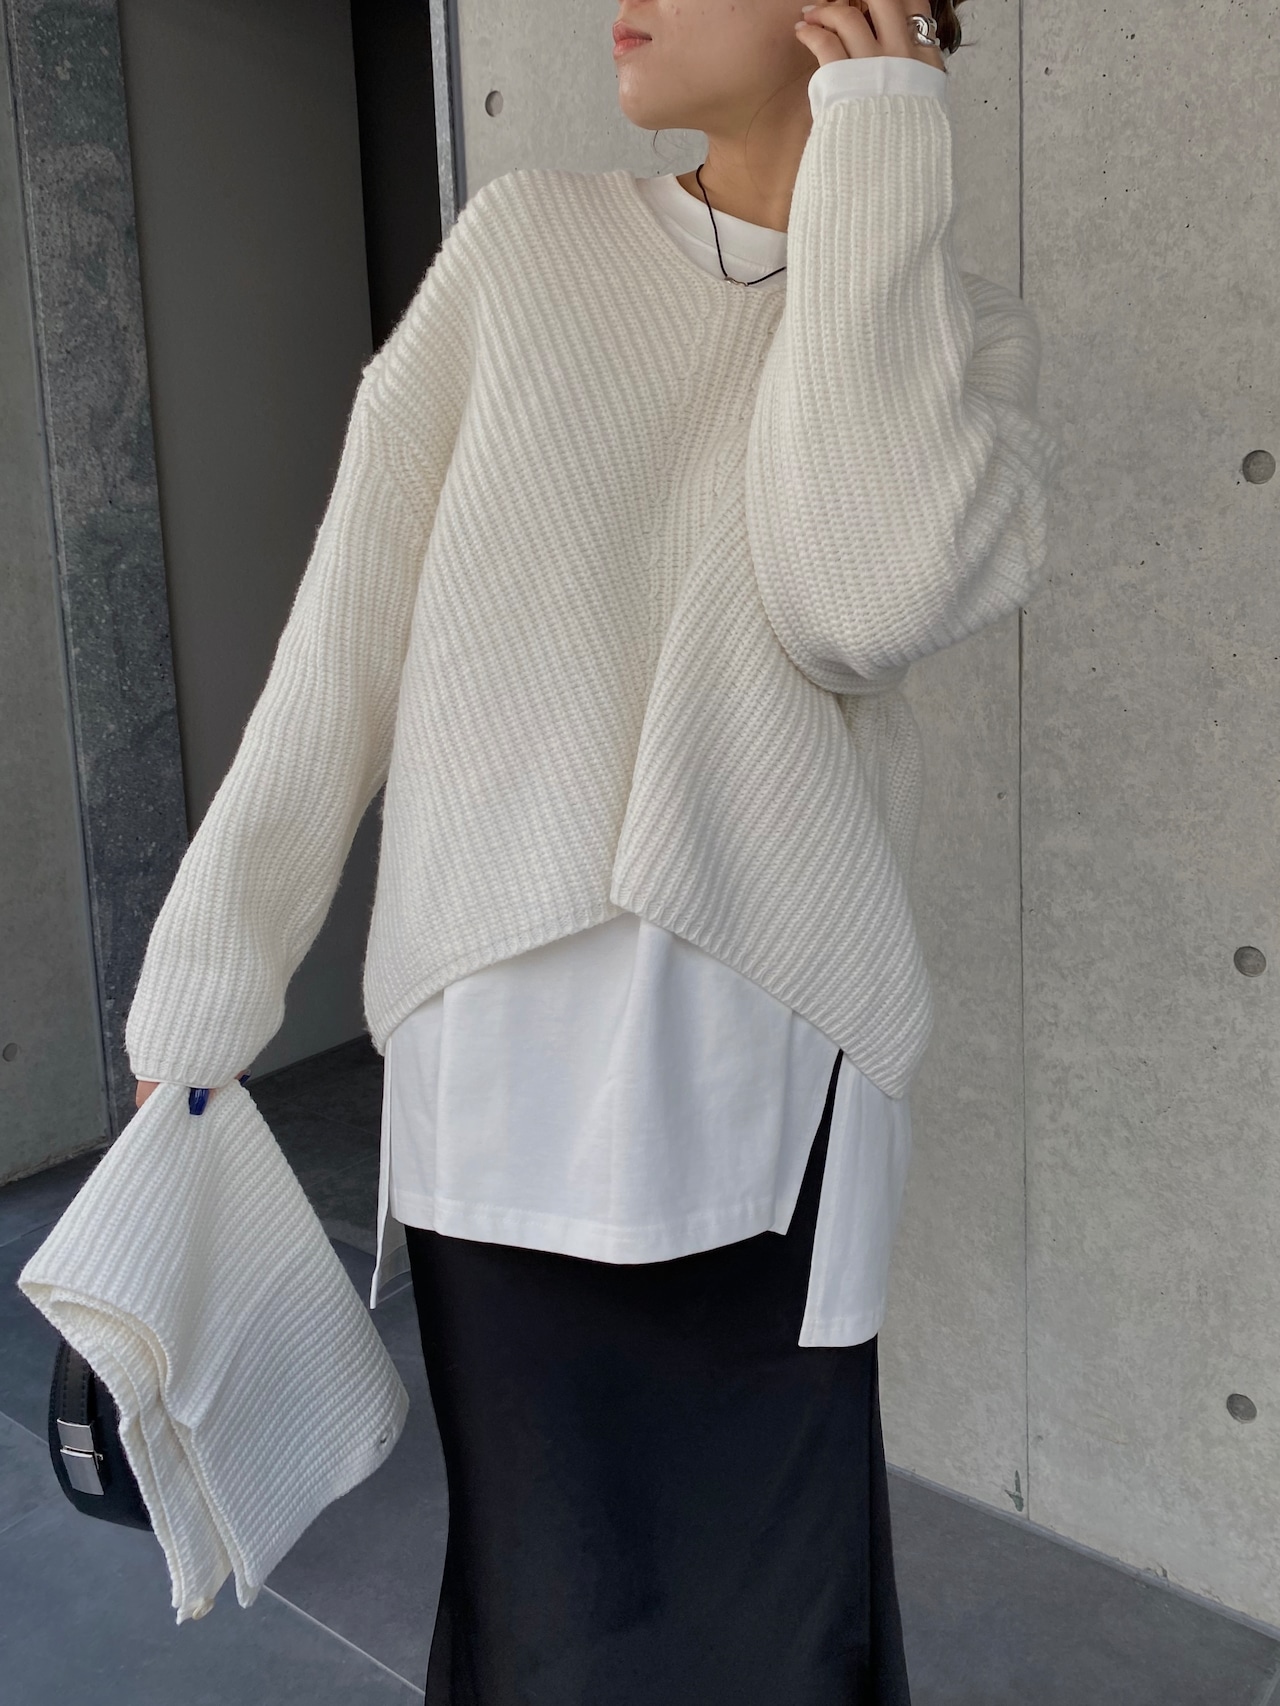 many way removeale neck detail smooth knit